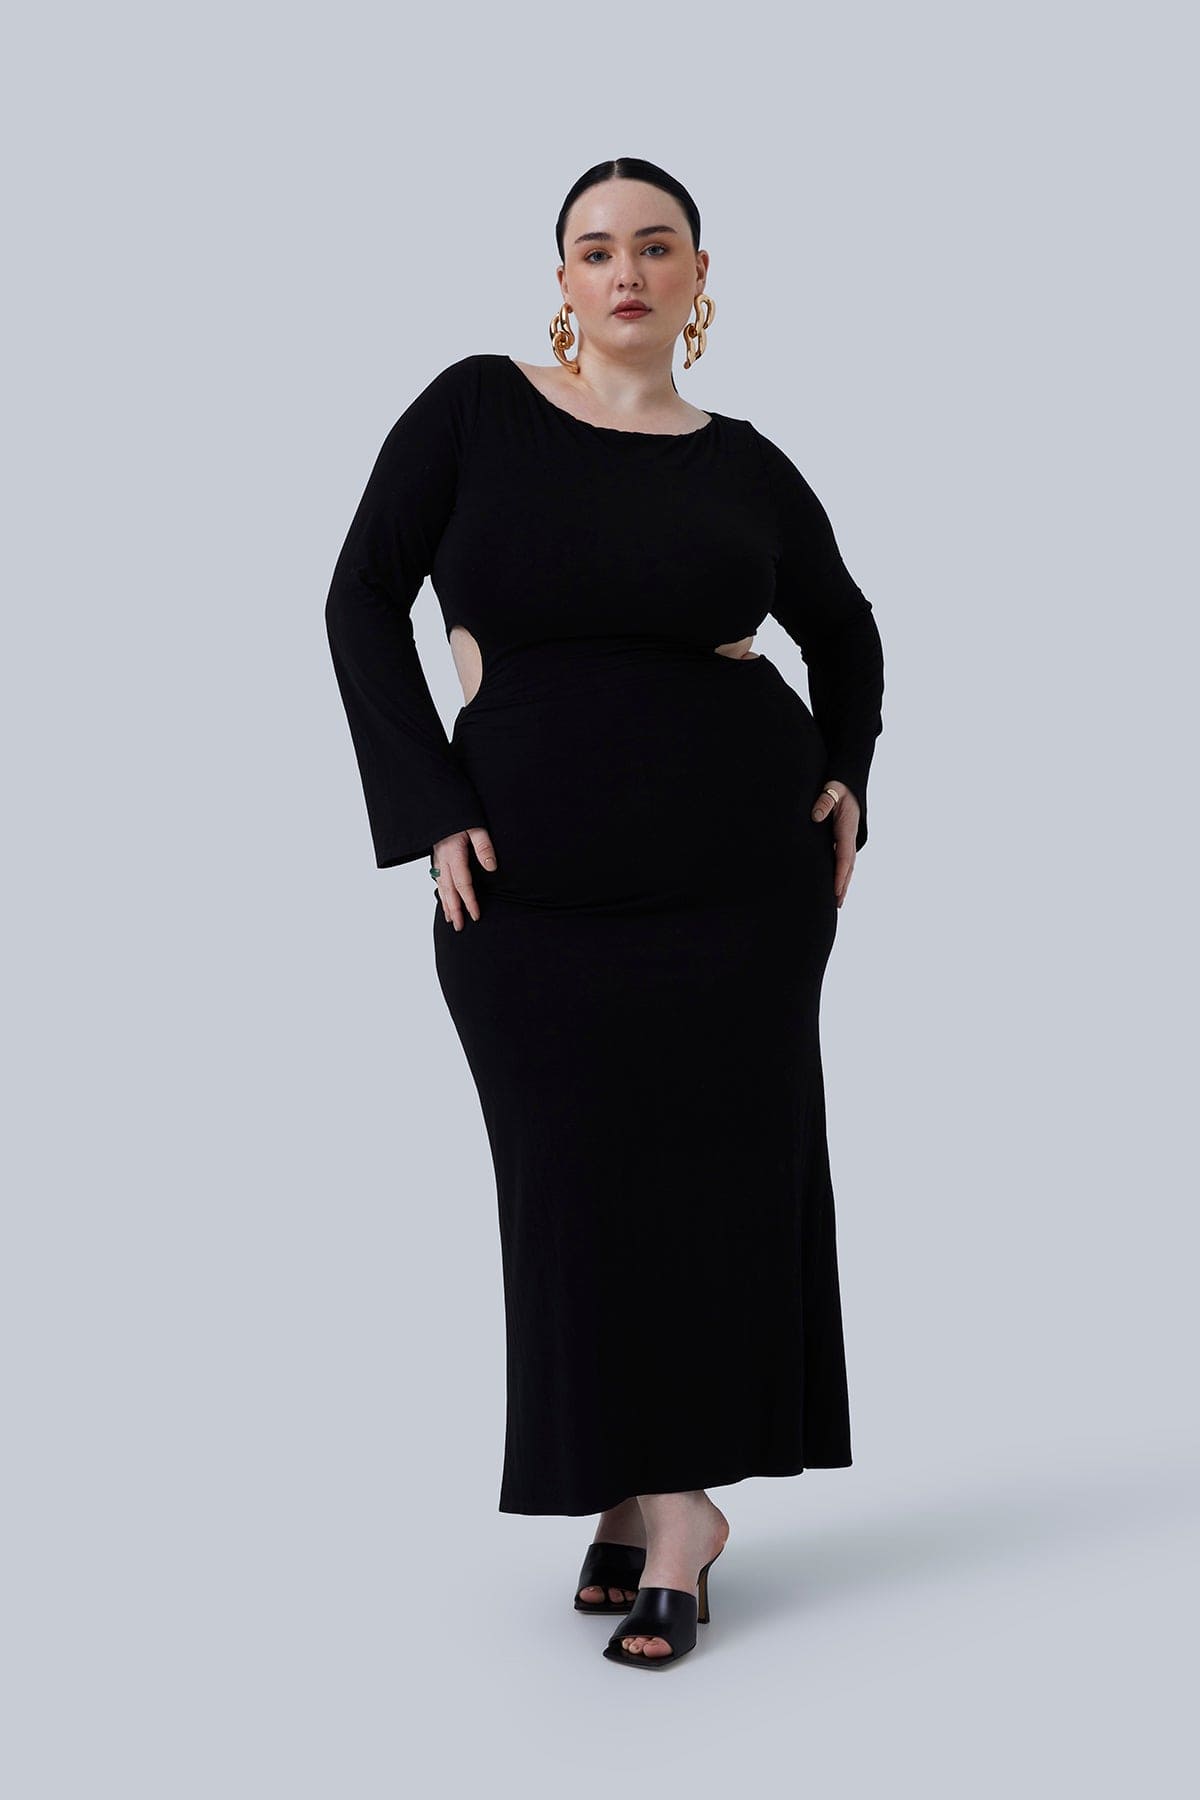 Gabrielle Maxi size 2X in black. Model standing with one leg crossed in front of the other. This long black dress for plus size women has flared sleeves and waist cutouts. Model has slick back hair and big chandelier earrings.